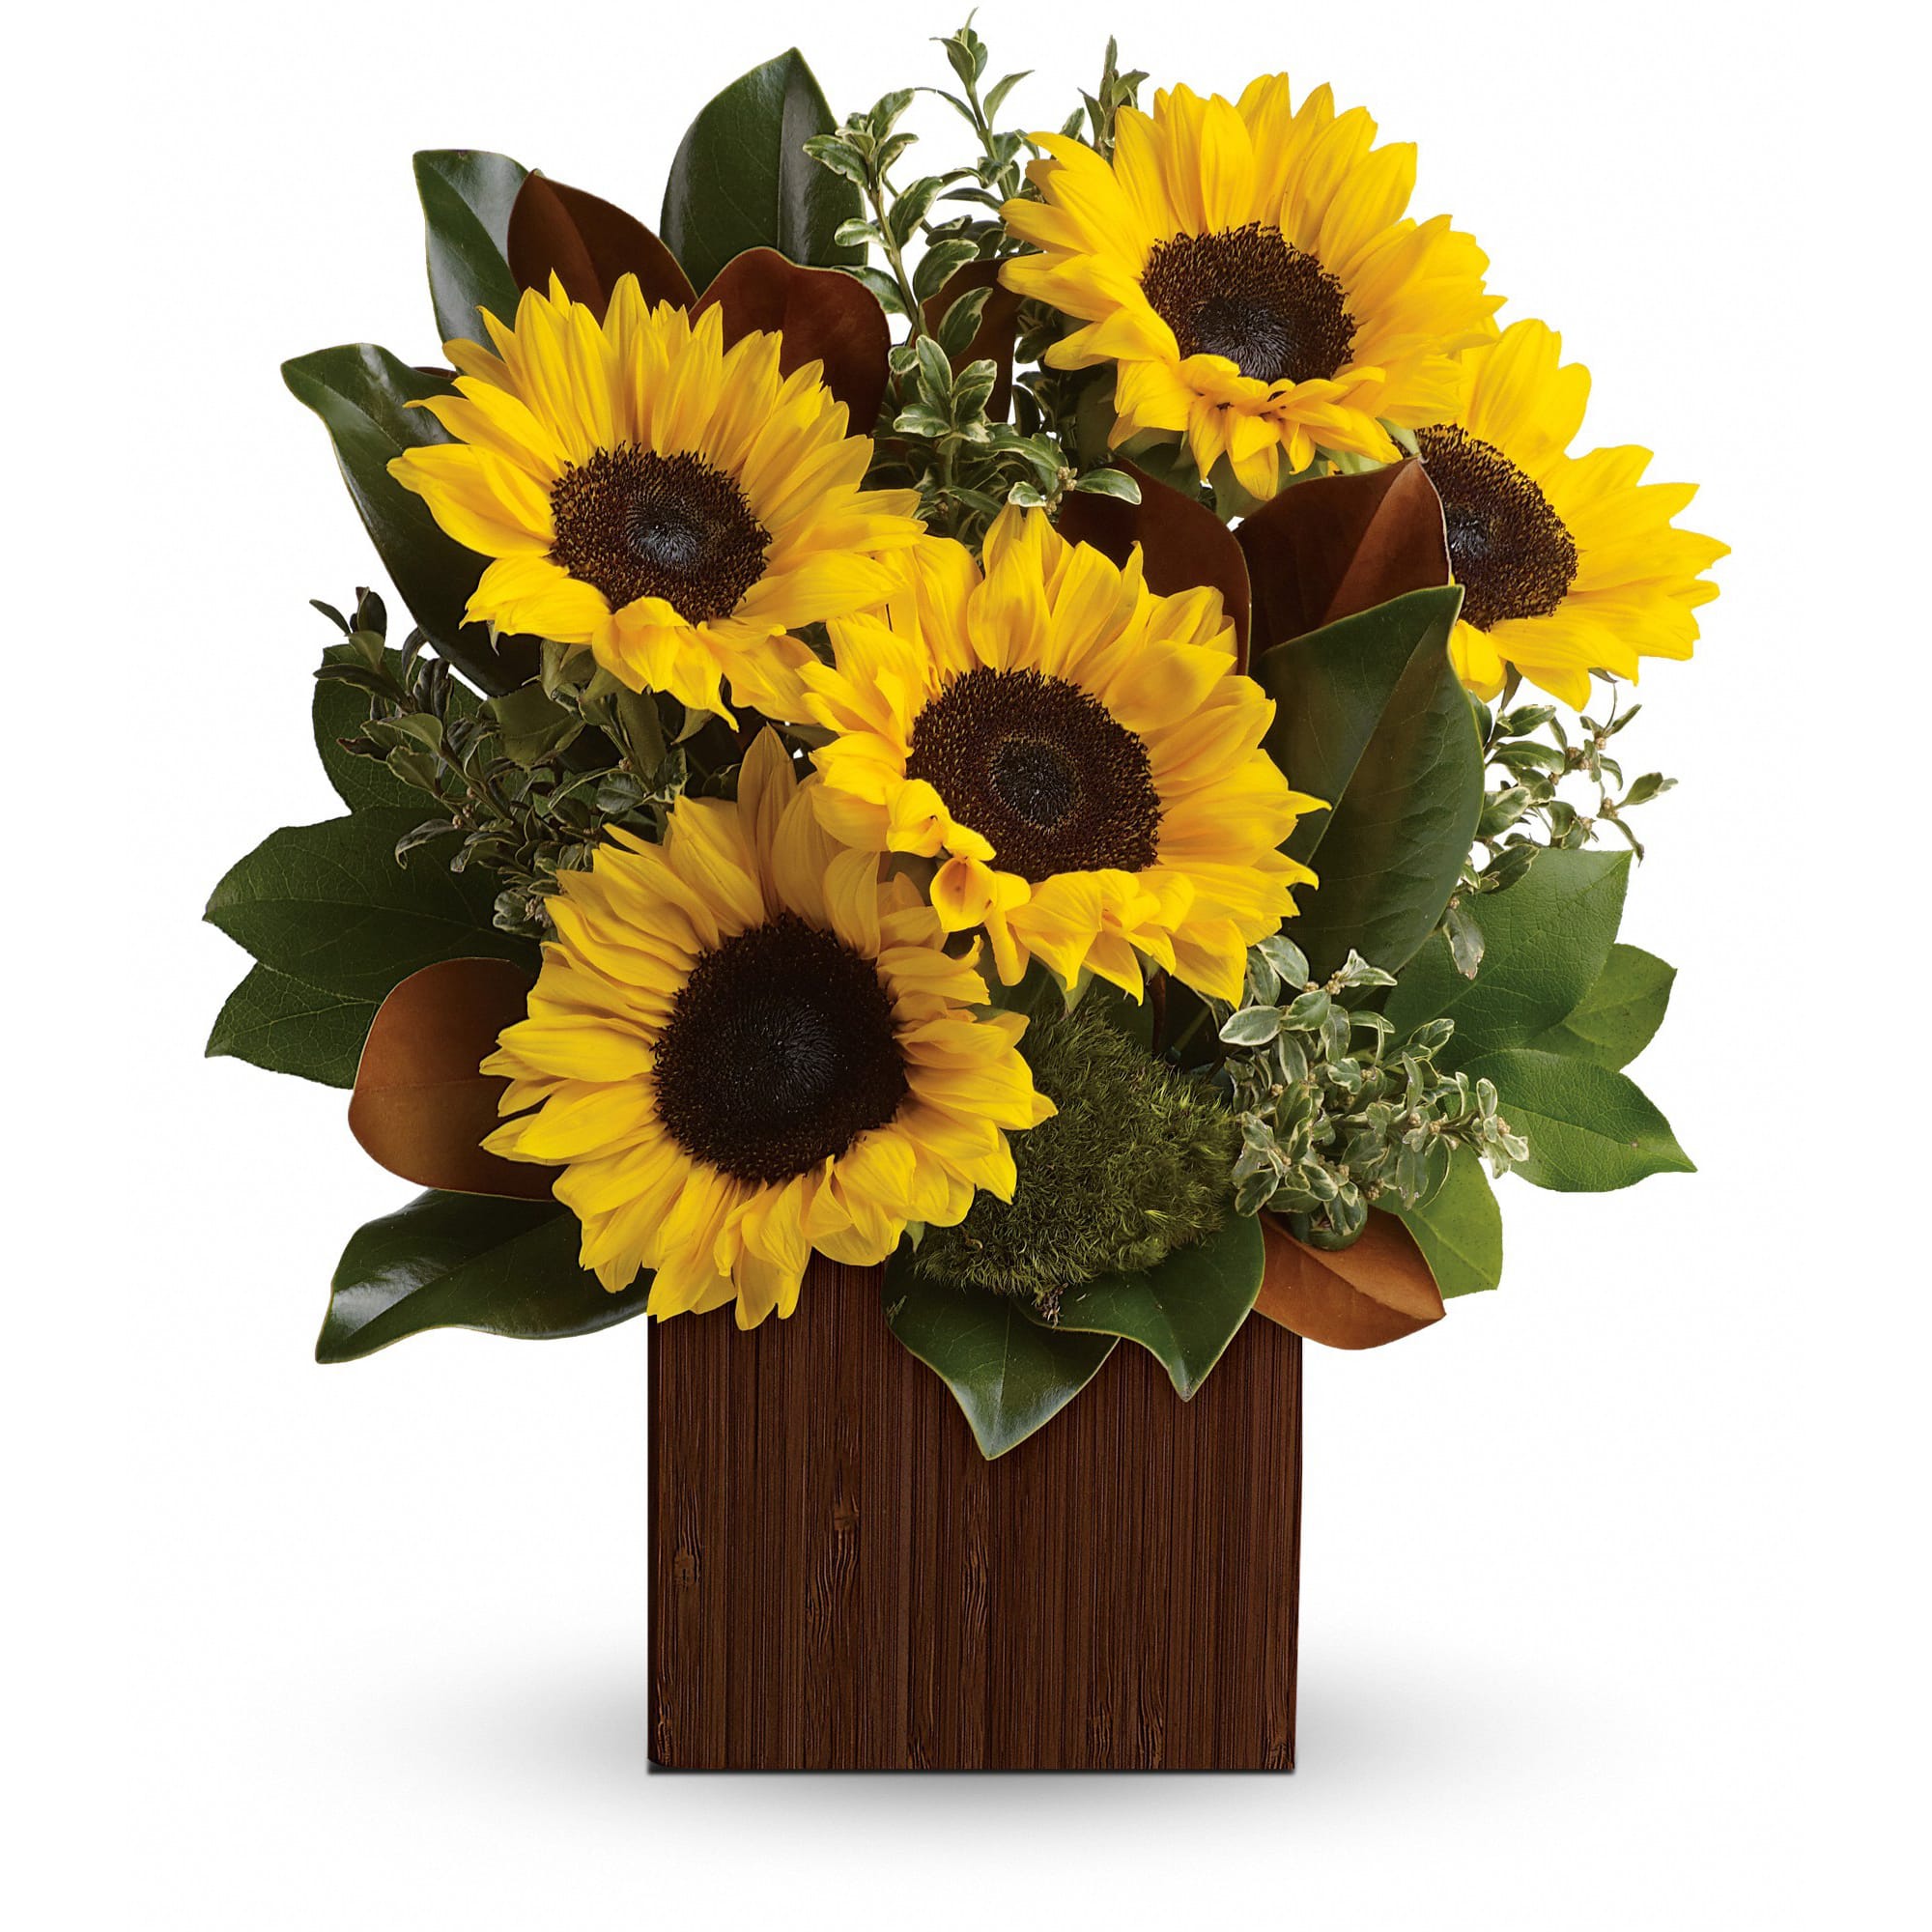 You're Golden Bouquet - Rise and shine! Send her a sunrise with this golden bouquet of bright-as-day sunflowers. It's the perfect gift for the light of your life. 